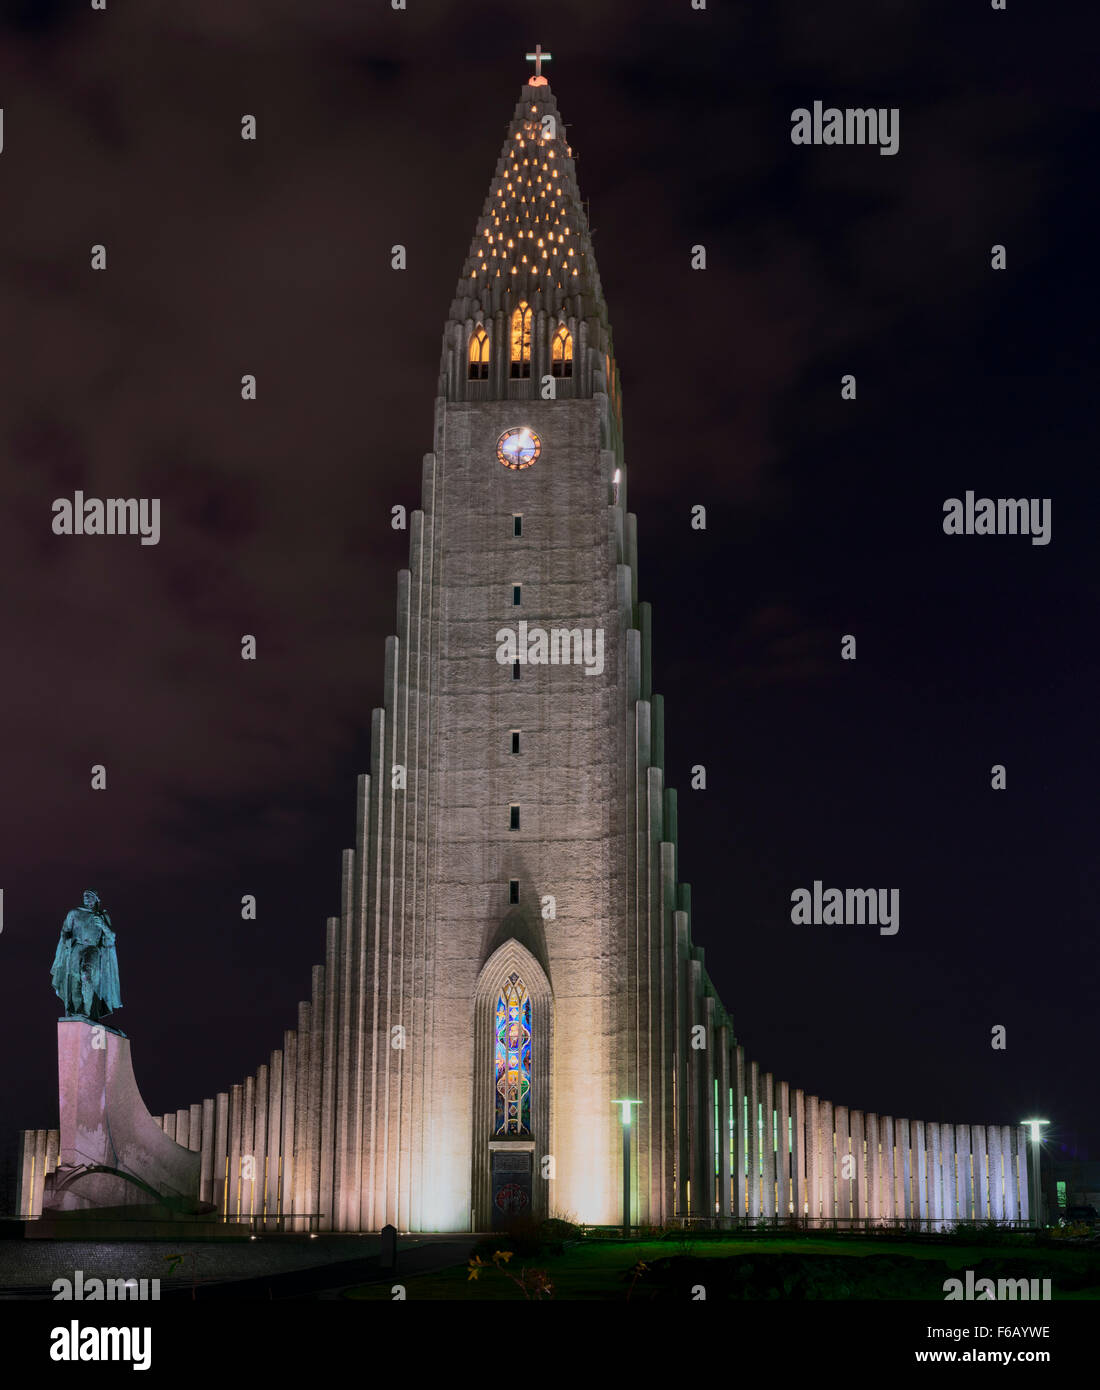 View of the Iconic Hallgrimskirkja Church at night, located in the centre of Reykjavik, Iceland Stock Photo